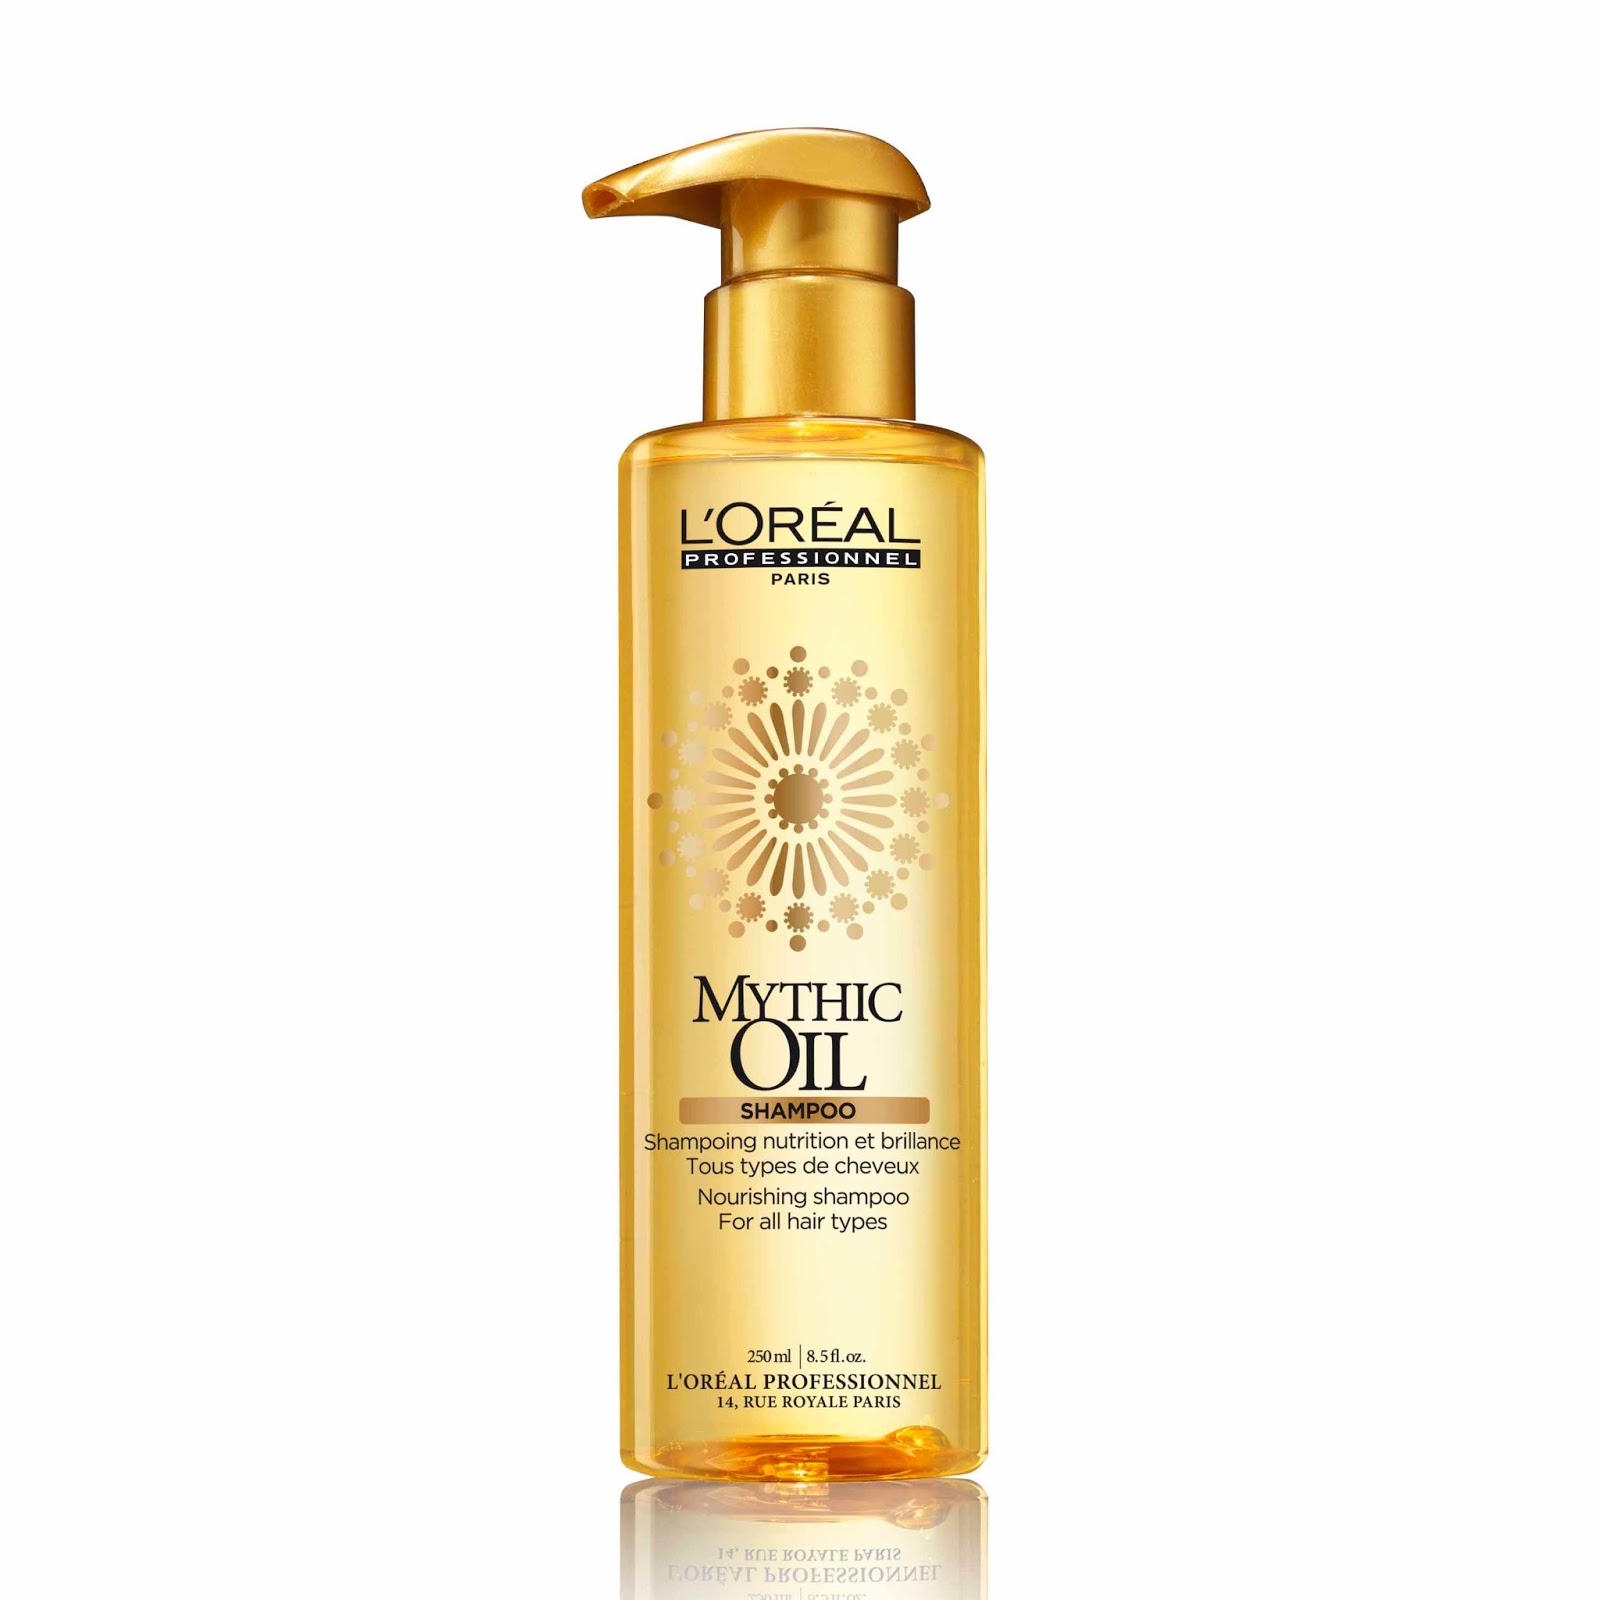 tammy-s-diary-review-mythic-oil-shampooing-de-l-or-al-professionnel